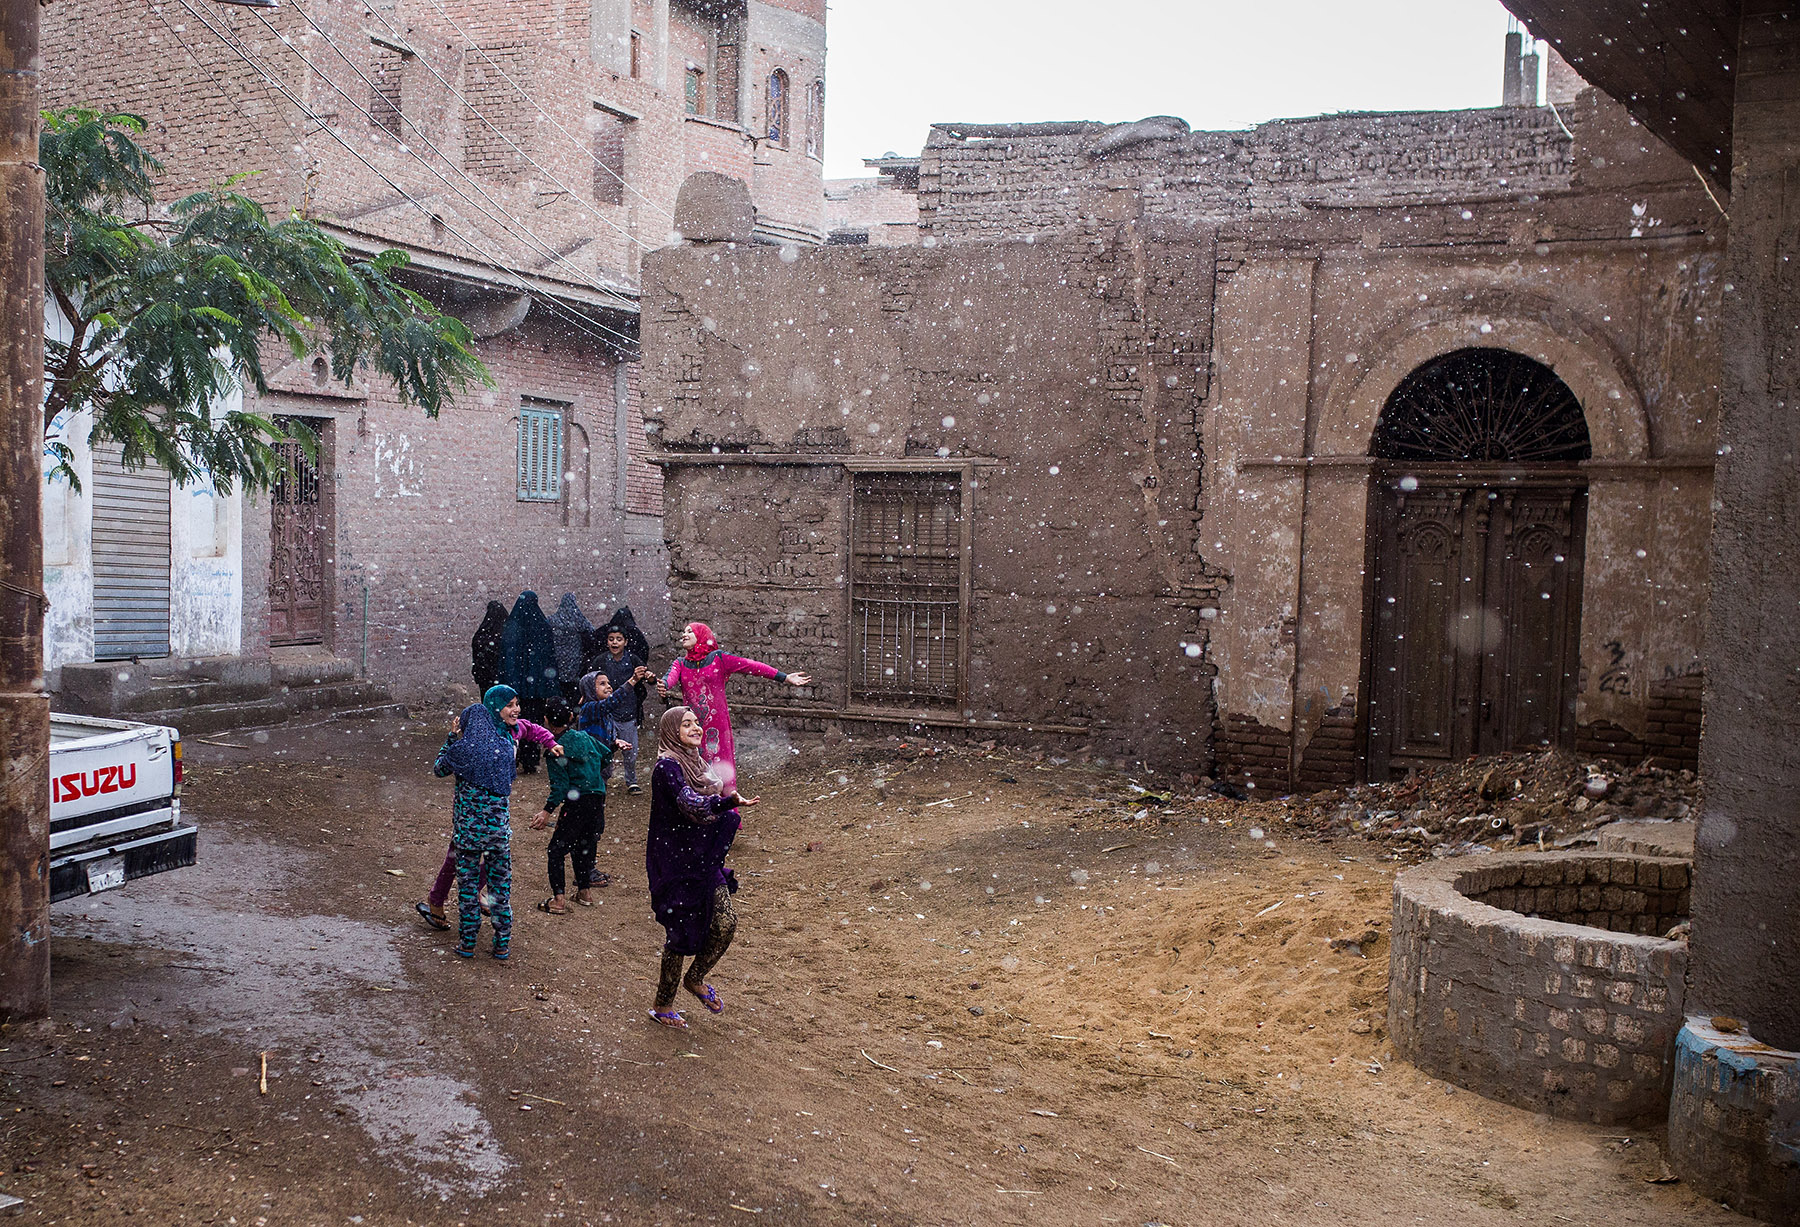 I took this photo during a rainy day in November 2018 from the window of my family home in Fayoum, Egypt, located about 100 kilometers southwest of the capital. It hardly rains but a few times in the year in most parts of Egypt, and when it does, it is always something special, bringing joy and happiness particularly for the local children.
—Hesham Elsherif
@hesham.a.elsherif
